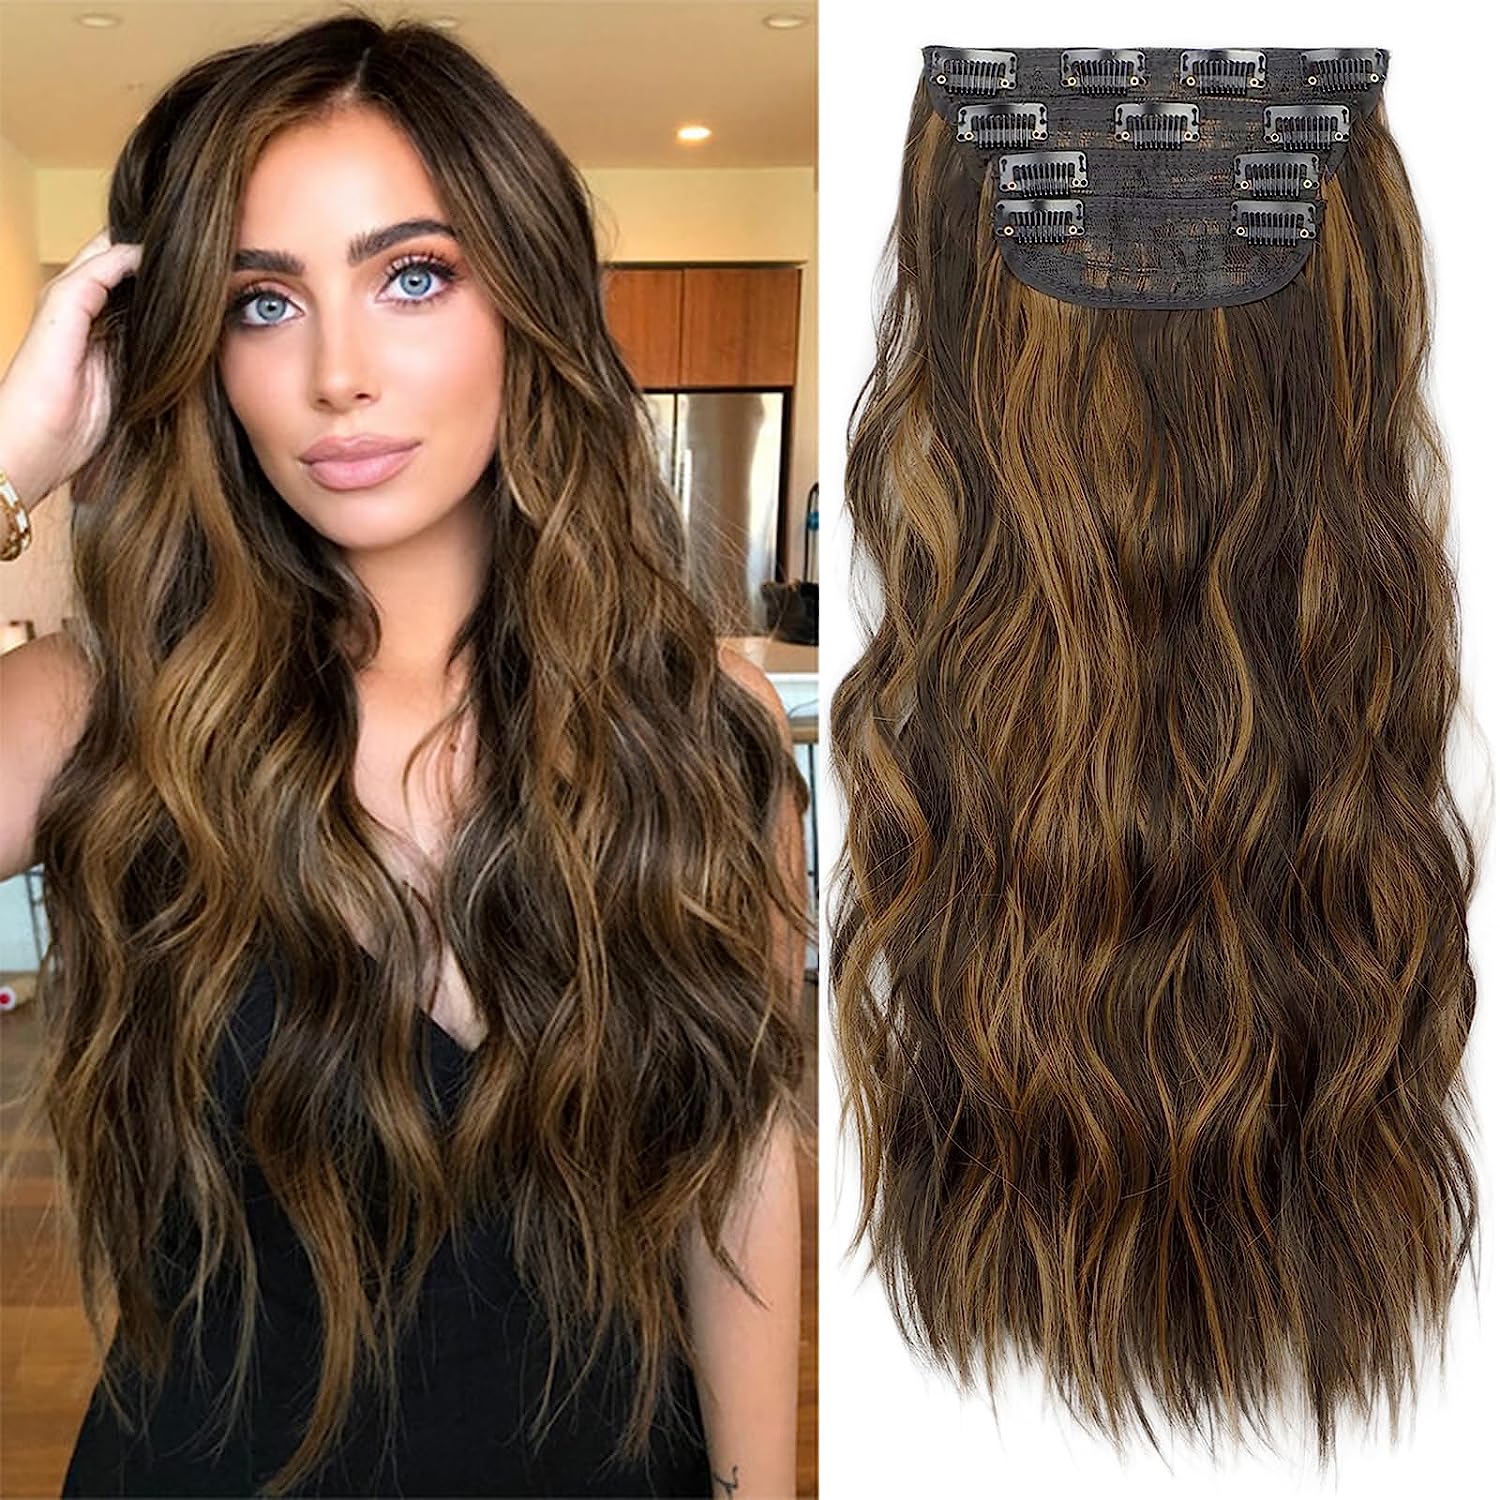 KooKaStyle Clip in Long Wavy Synthetic Hair Extension [...]